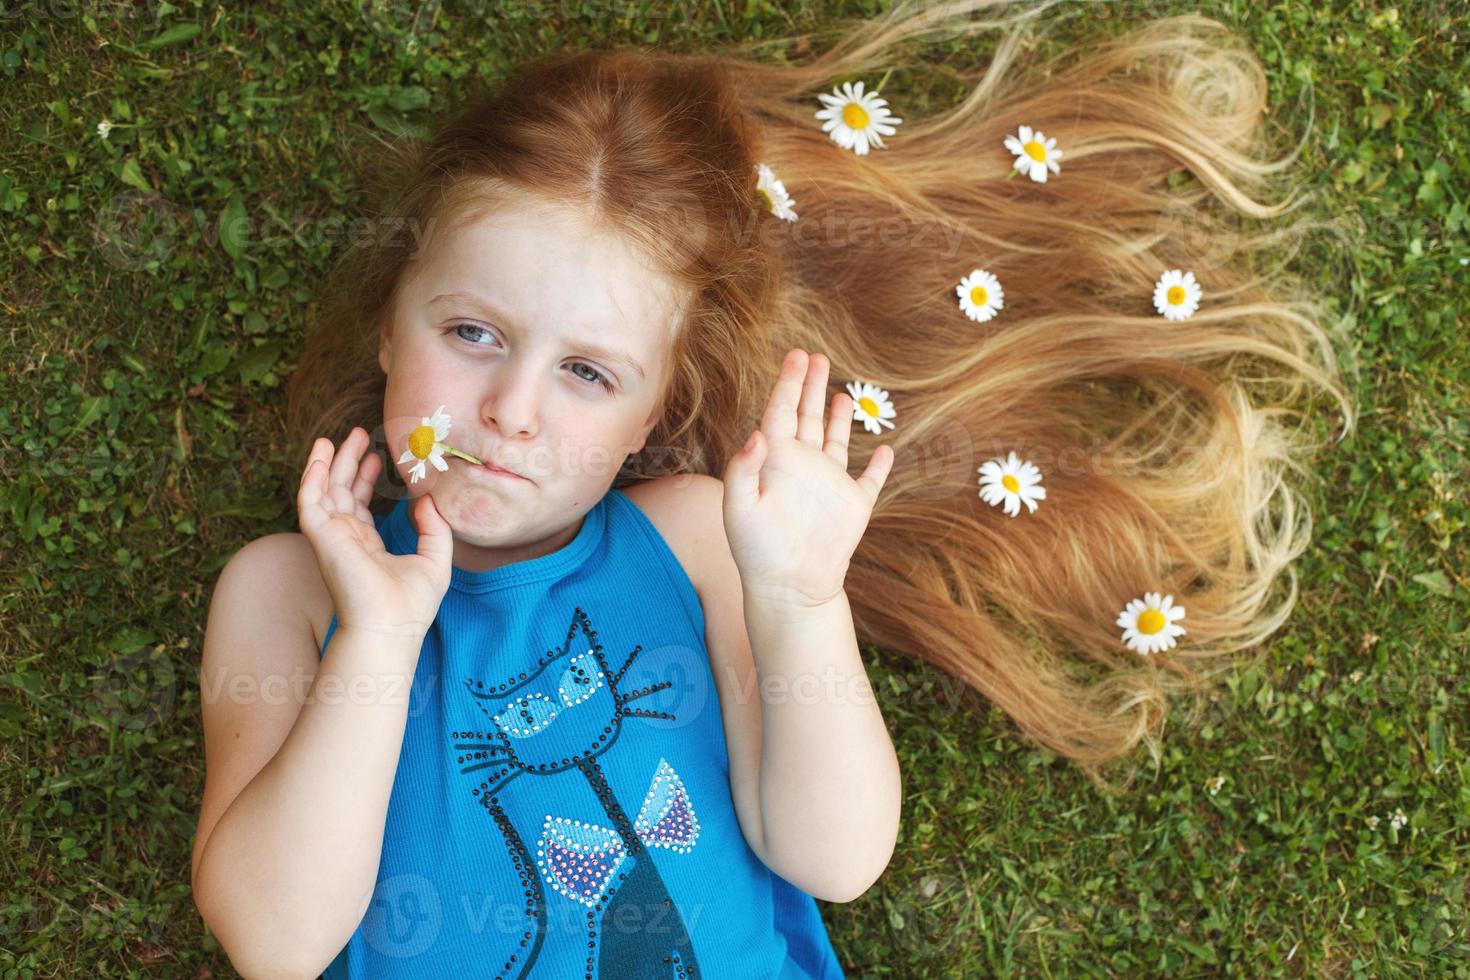 portrait of a beautiful little girl with healthy red hair with chamomile flowers lying on the grass photo